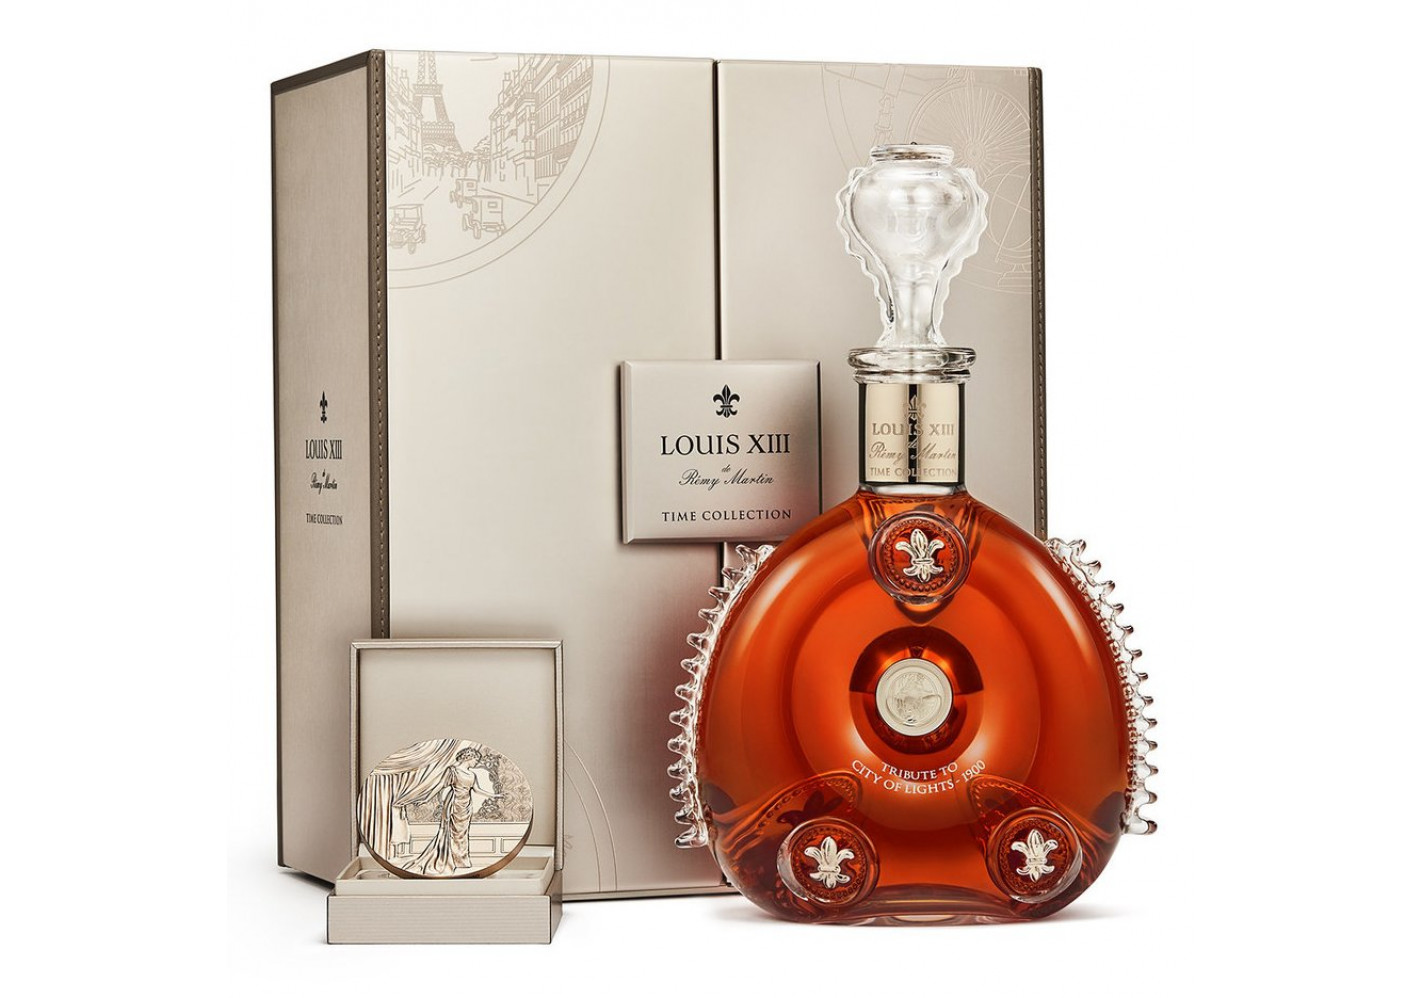 Rémy Martin Louis XIII Time Collection Cognac: Buy Online and Find